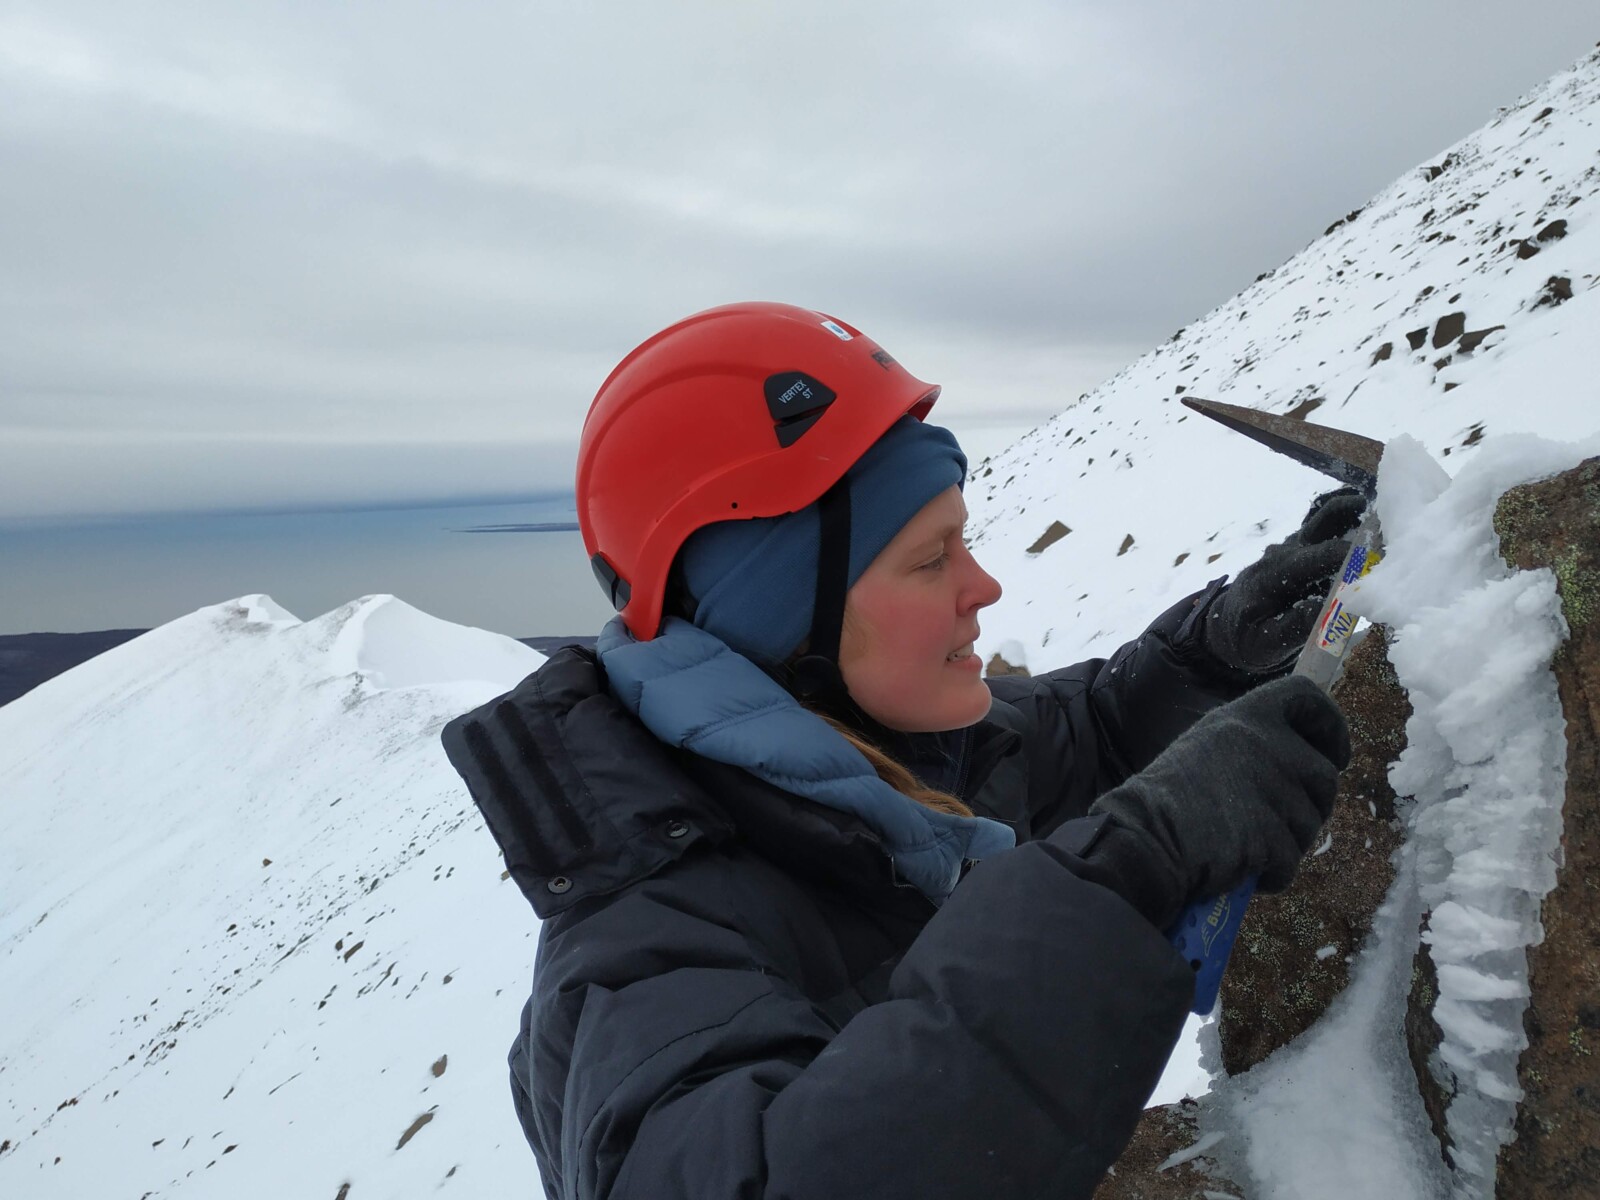 a female scientists using an axe to take rock samples from a rocky outcrop in a snowy landscape.